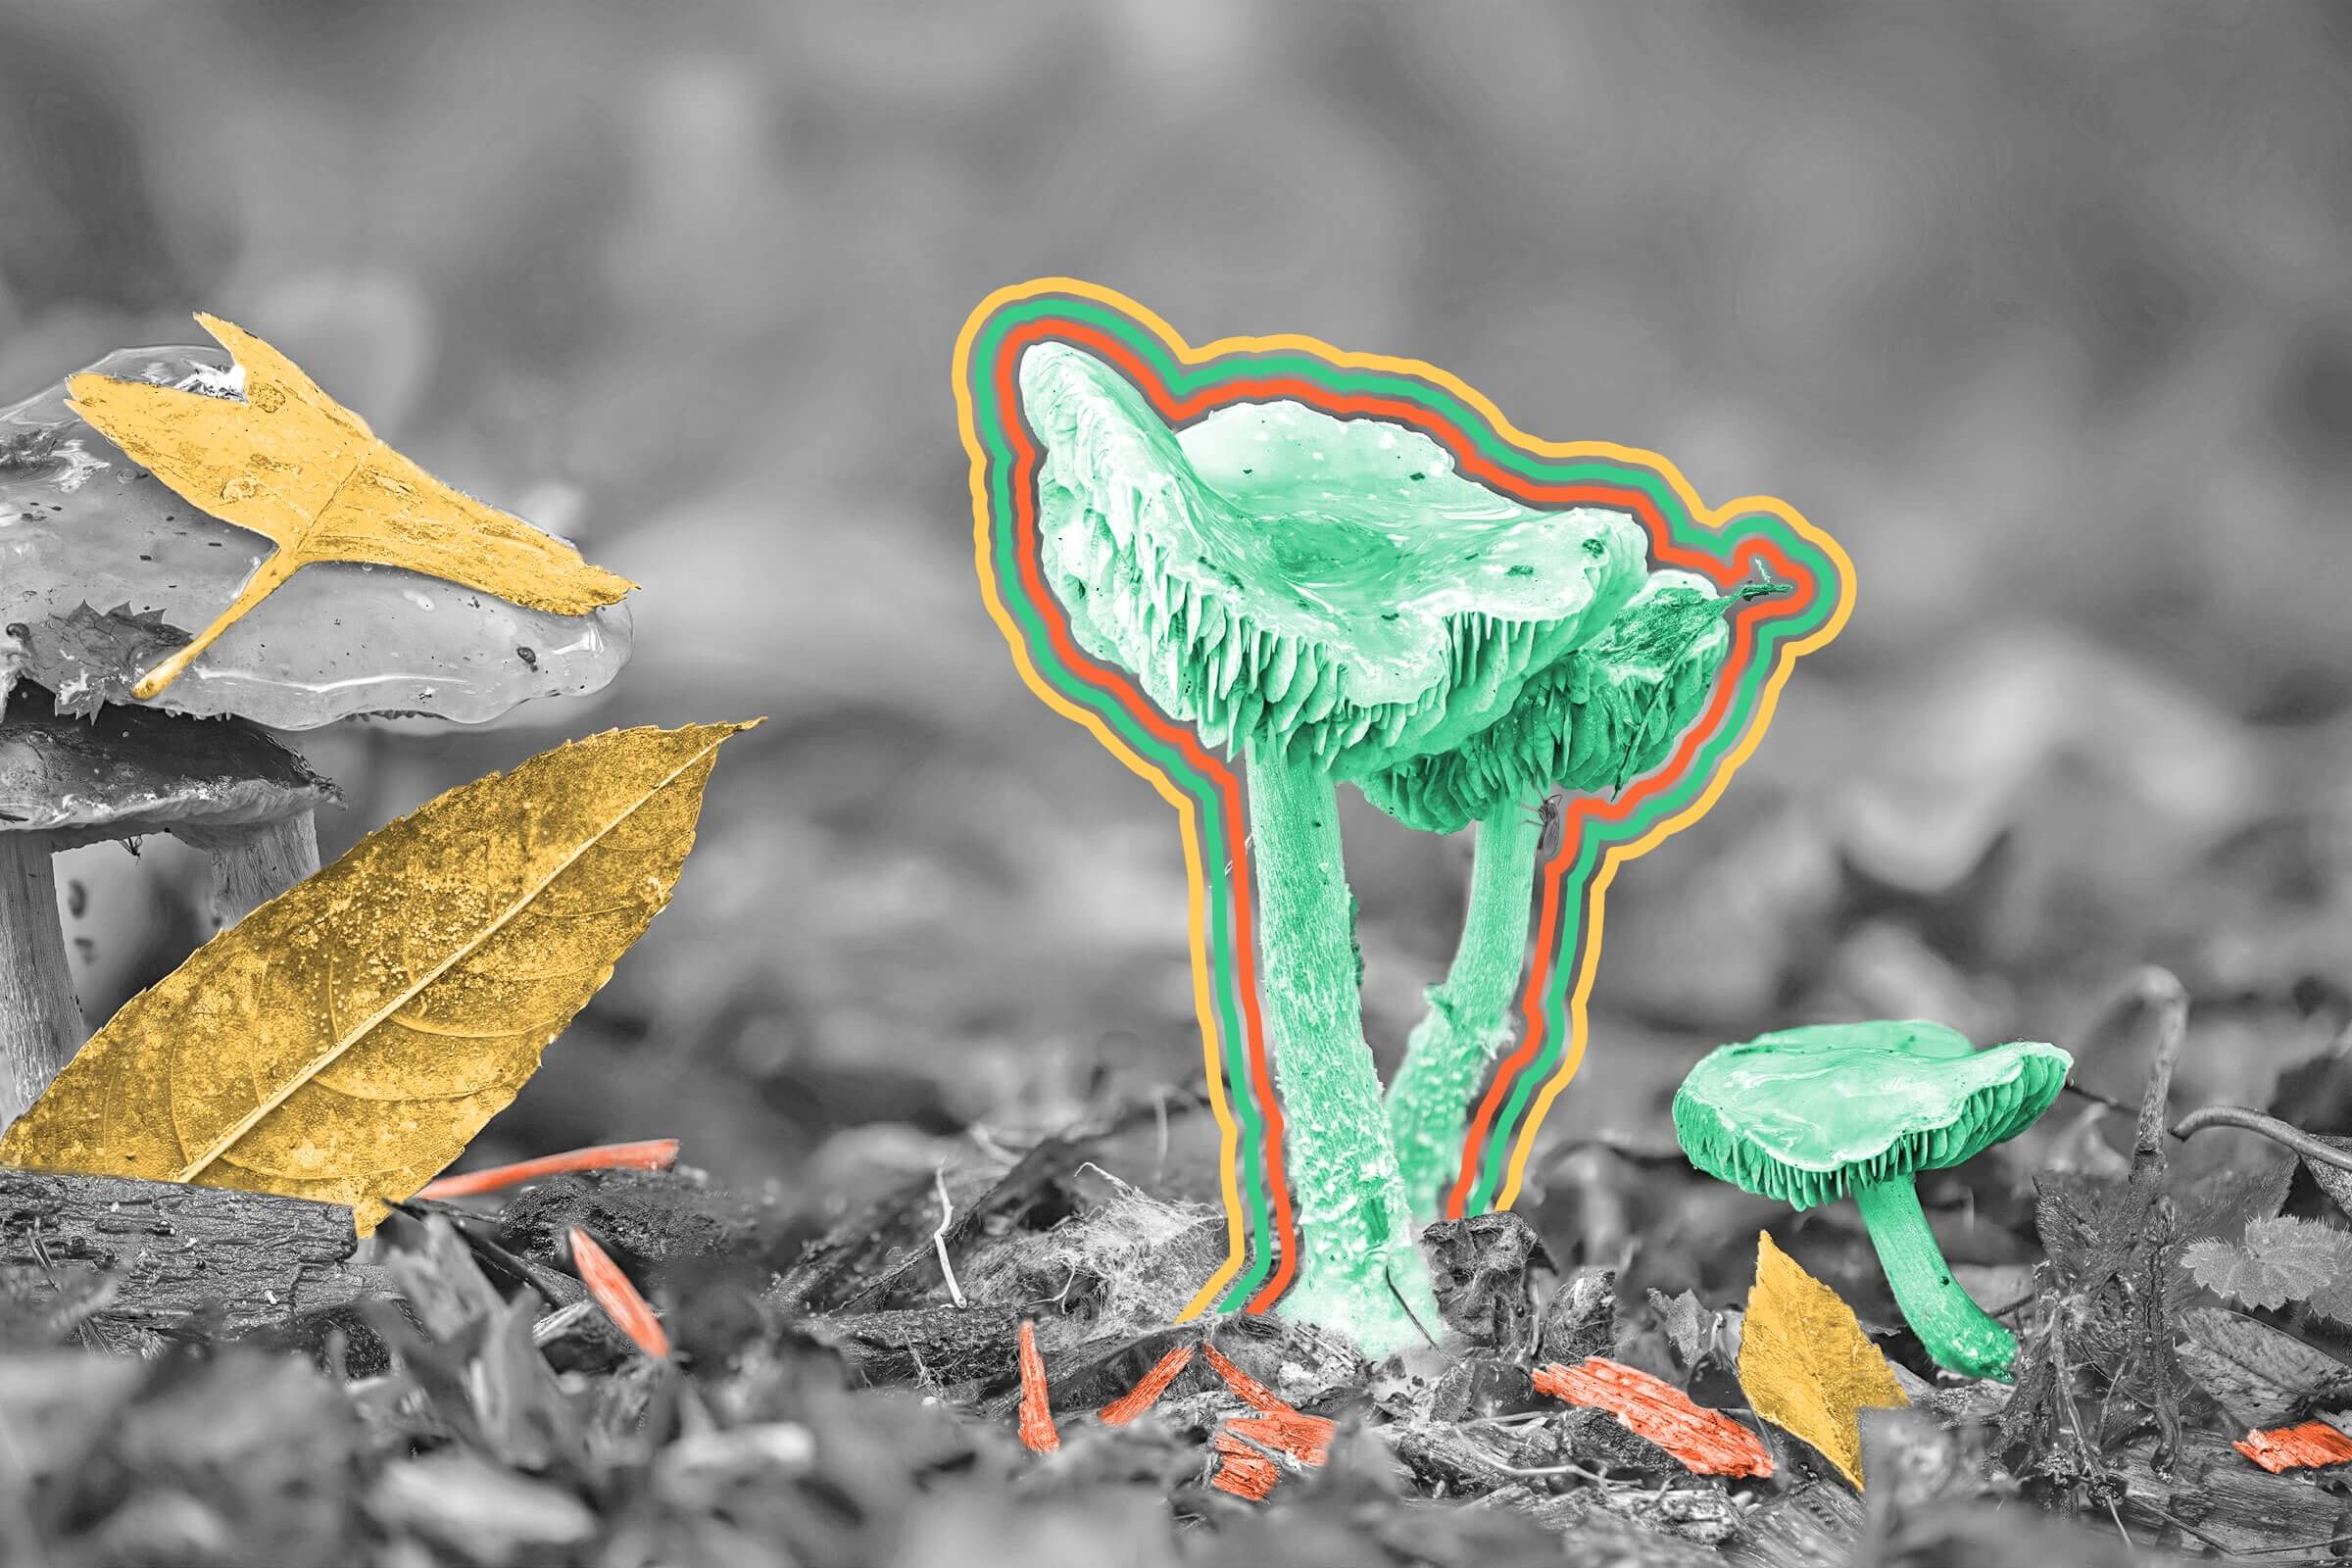 Fungi are genetically closer to humans than plants.